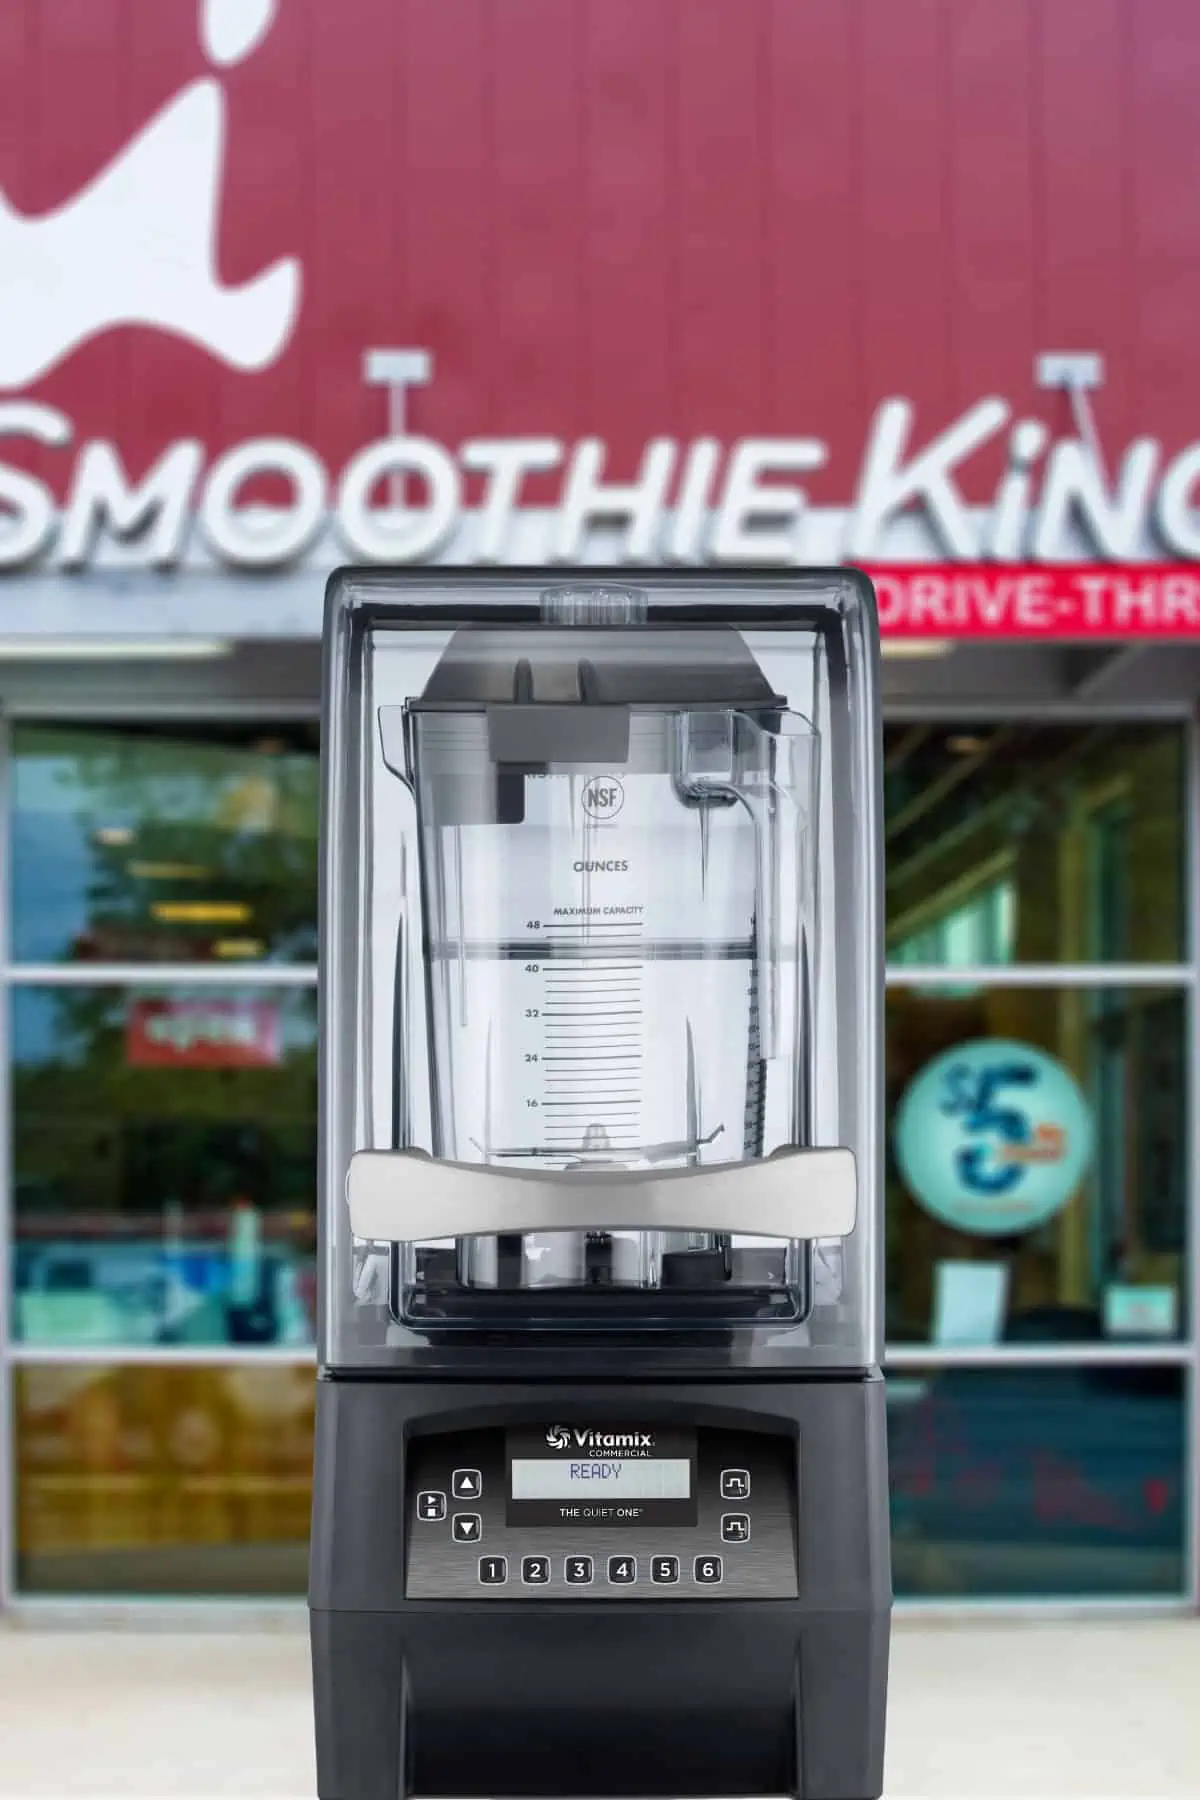 Smoothie King Storefront With Vitamix The Quiet One Blender